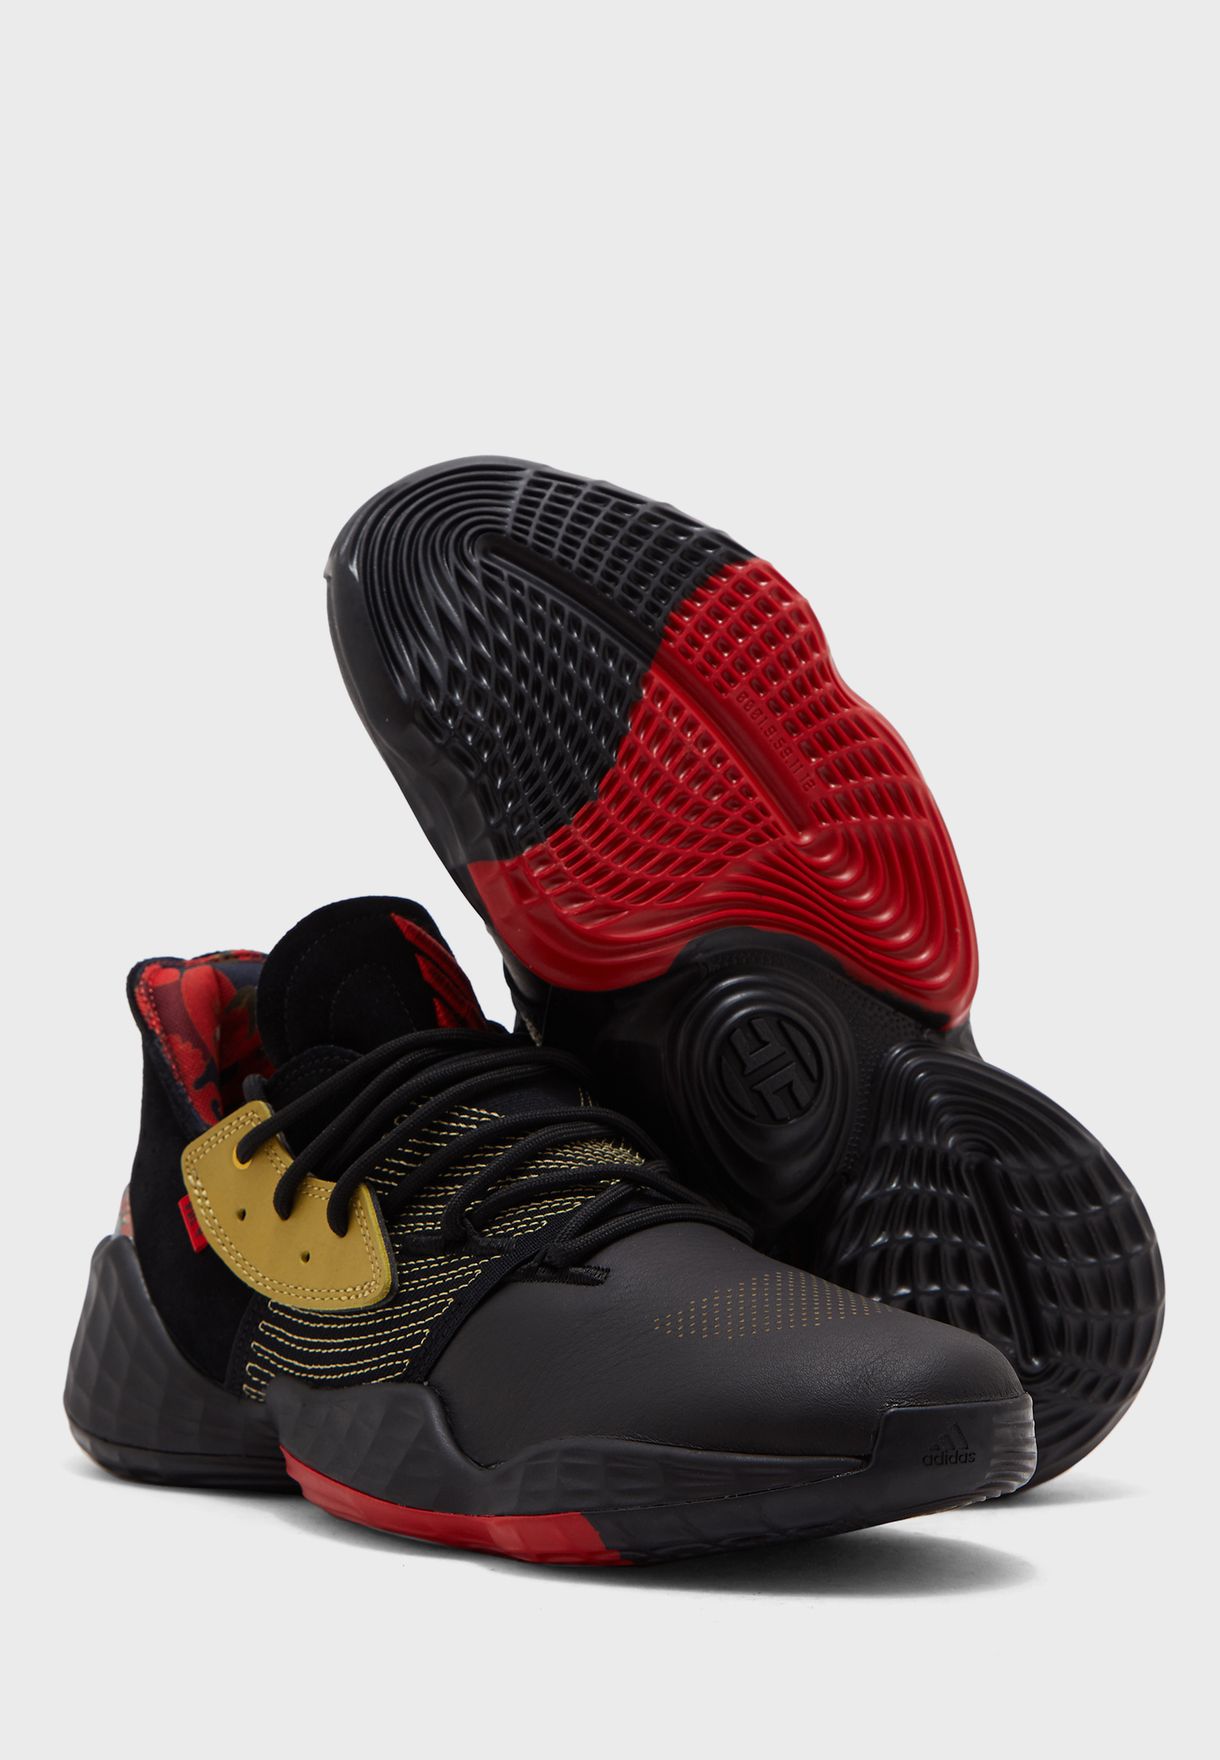 harden vol 4 black and red